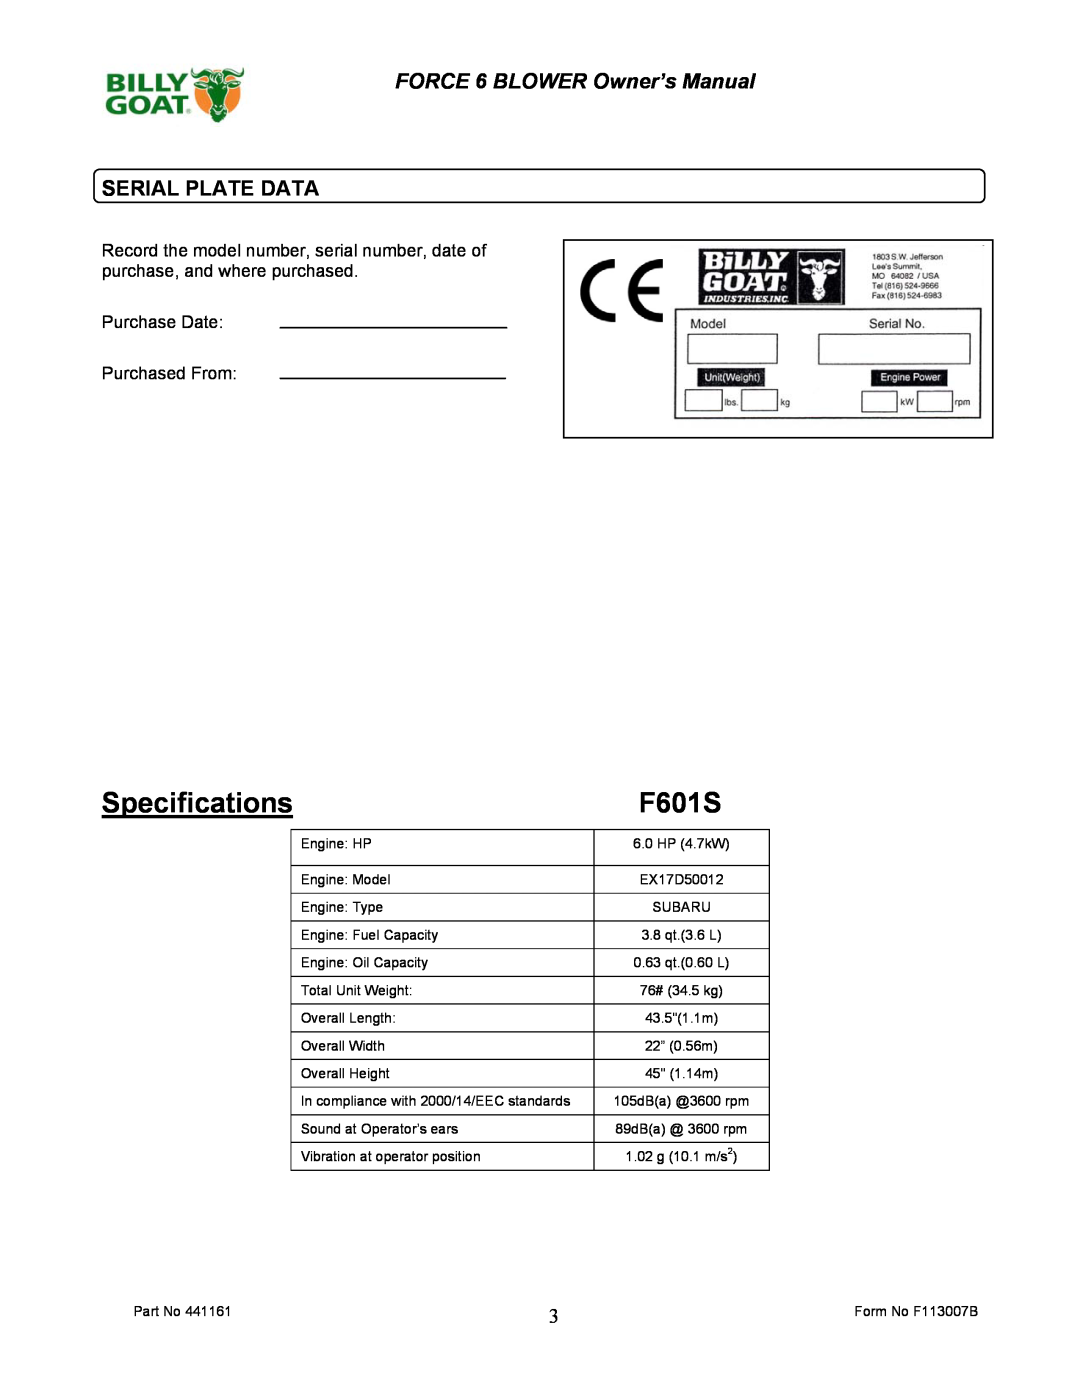 Billy Goat F601S owner manual Serial Plate Data, Specifications 